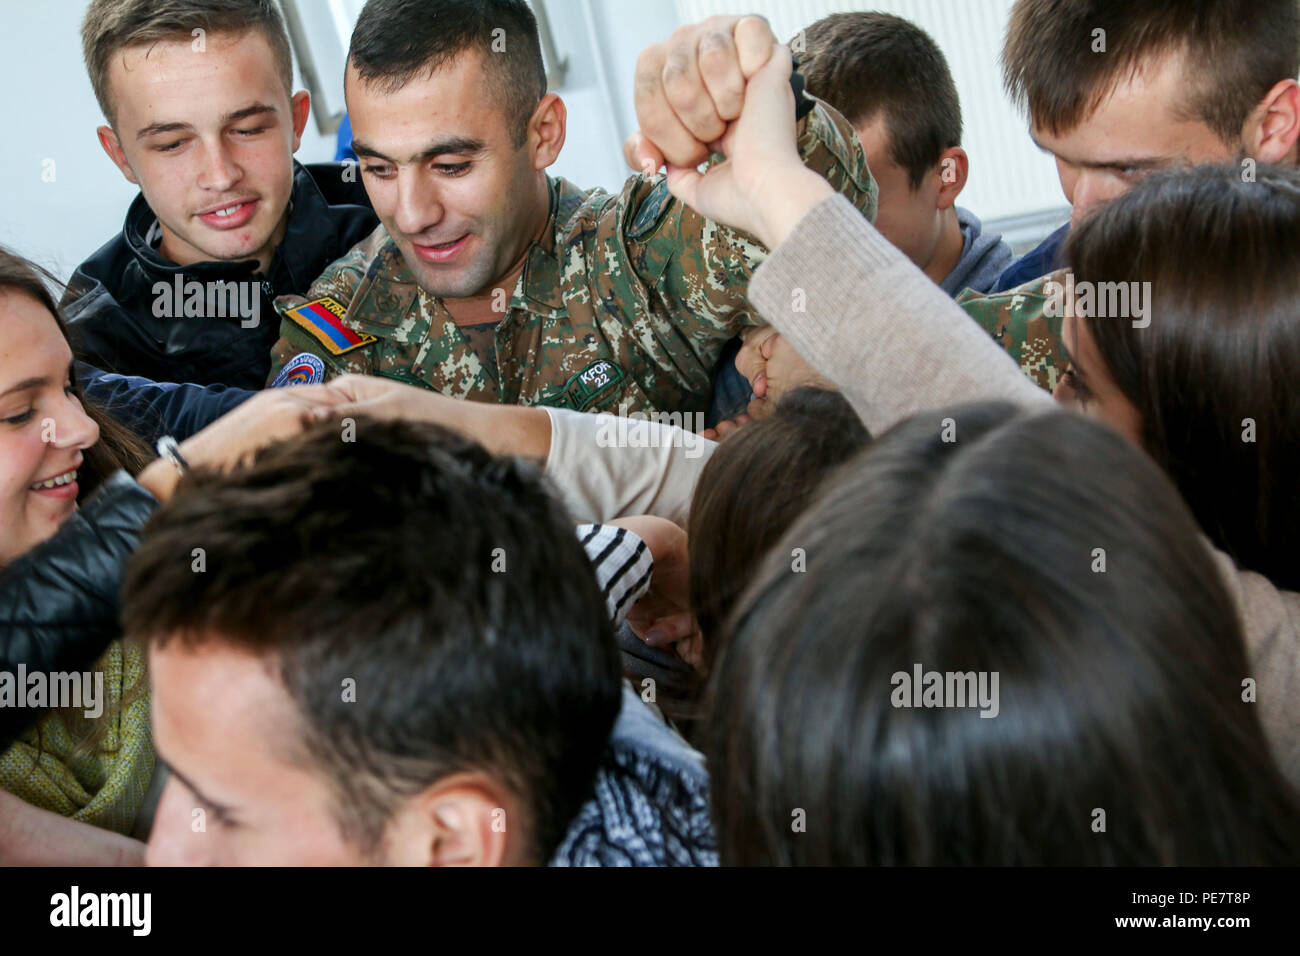 An Armenian Soldier serving in Kosovo with Multinational Battle Group-East leads a group of students attending a Violence Free Future tolerance event through a game called The Human Knot, Oct. 17, 2015, in Kacanik, Kosovo. During the game, the students used teamwork and communication skills to untangle themselves without letting go of each other’s hands. Several members of MNBG-E volunteered their time to lead this and other games used to simulate real-life situations and start conversations about stereotypes, respect and overcoming differences. (U.S. Army photo by Staff Sgt. Mary Junell, Mult Stock Photo